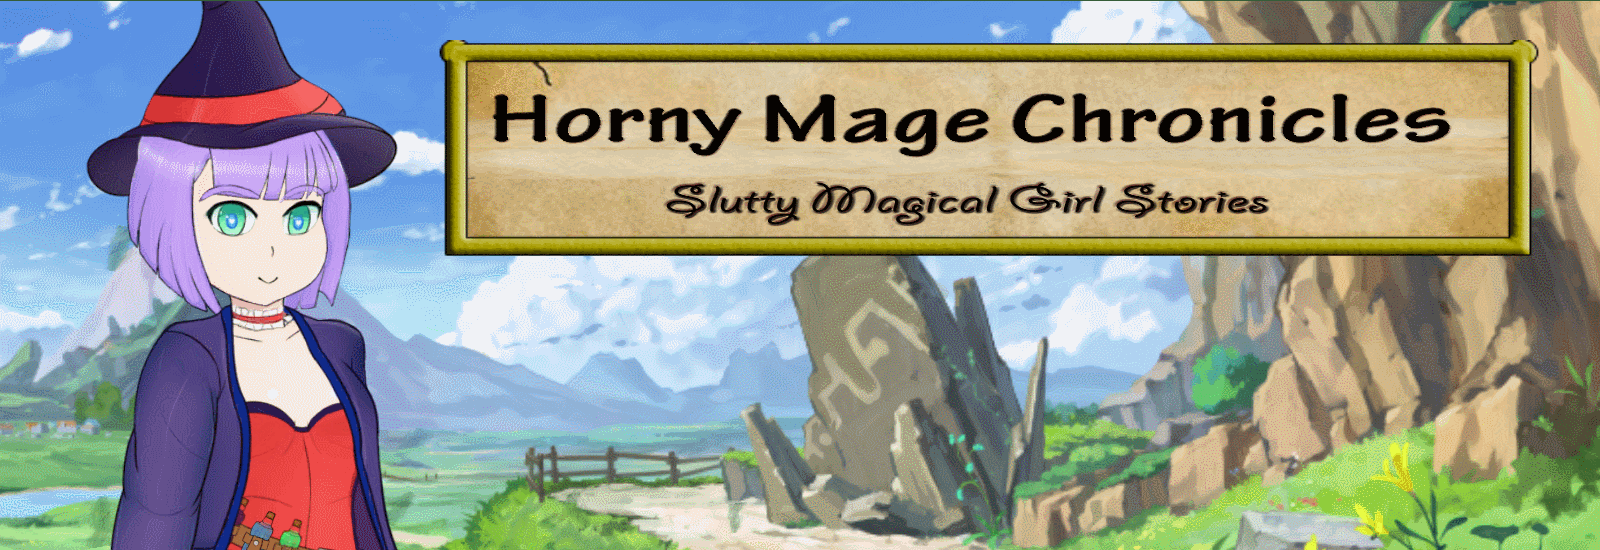 Horny Mage Chronicles Apk Adult Game Download (2)